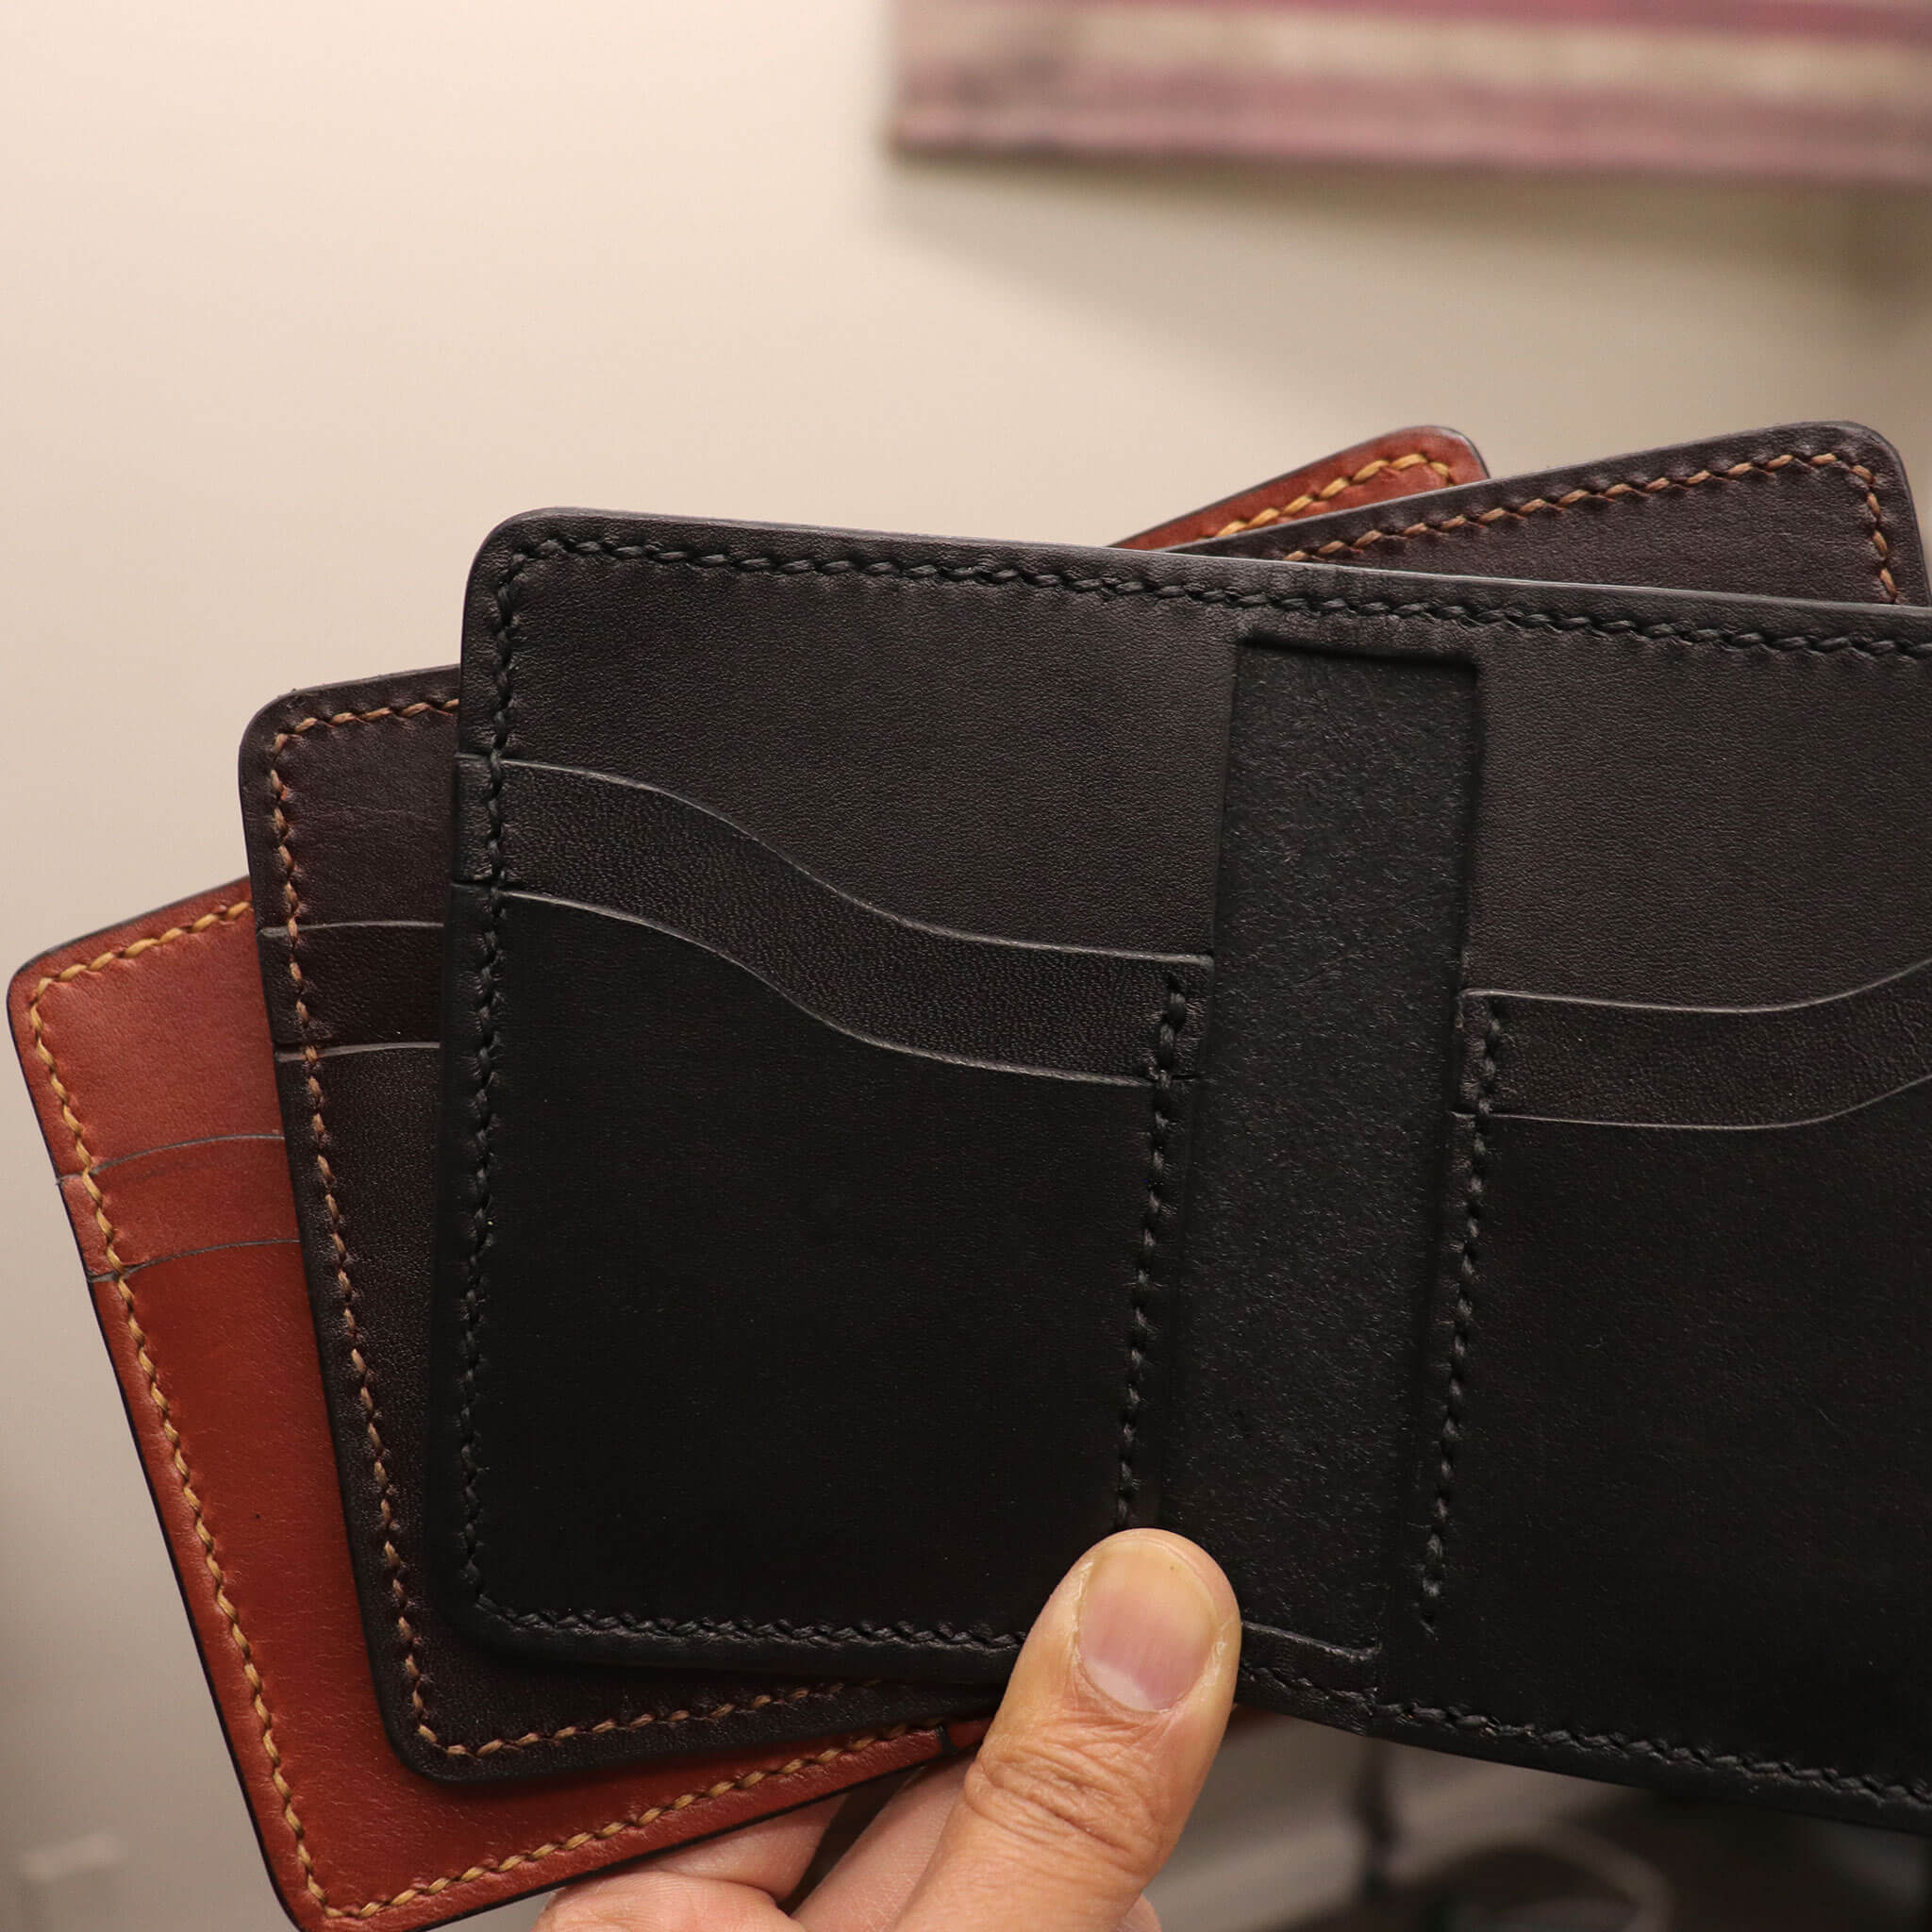 Ltd. Ed. Handmade Rye Wickett Leather Slip Wallet  Sustainable,  Eco-friendly and Zero-waste products